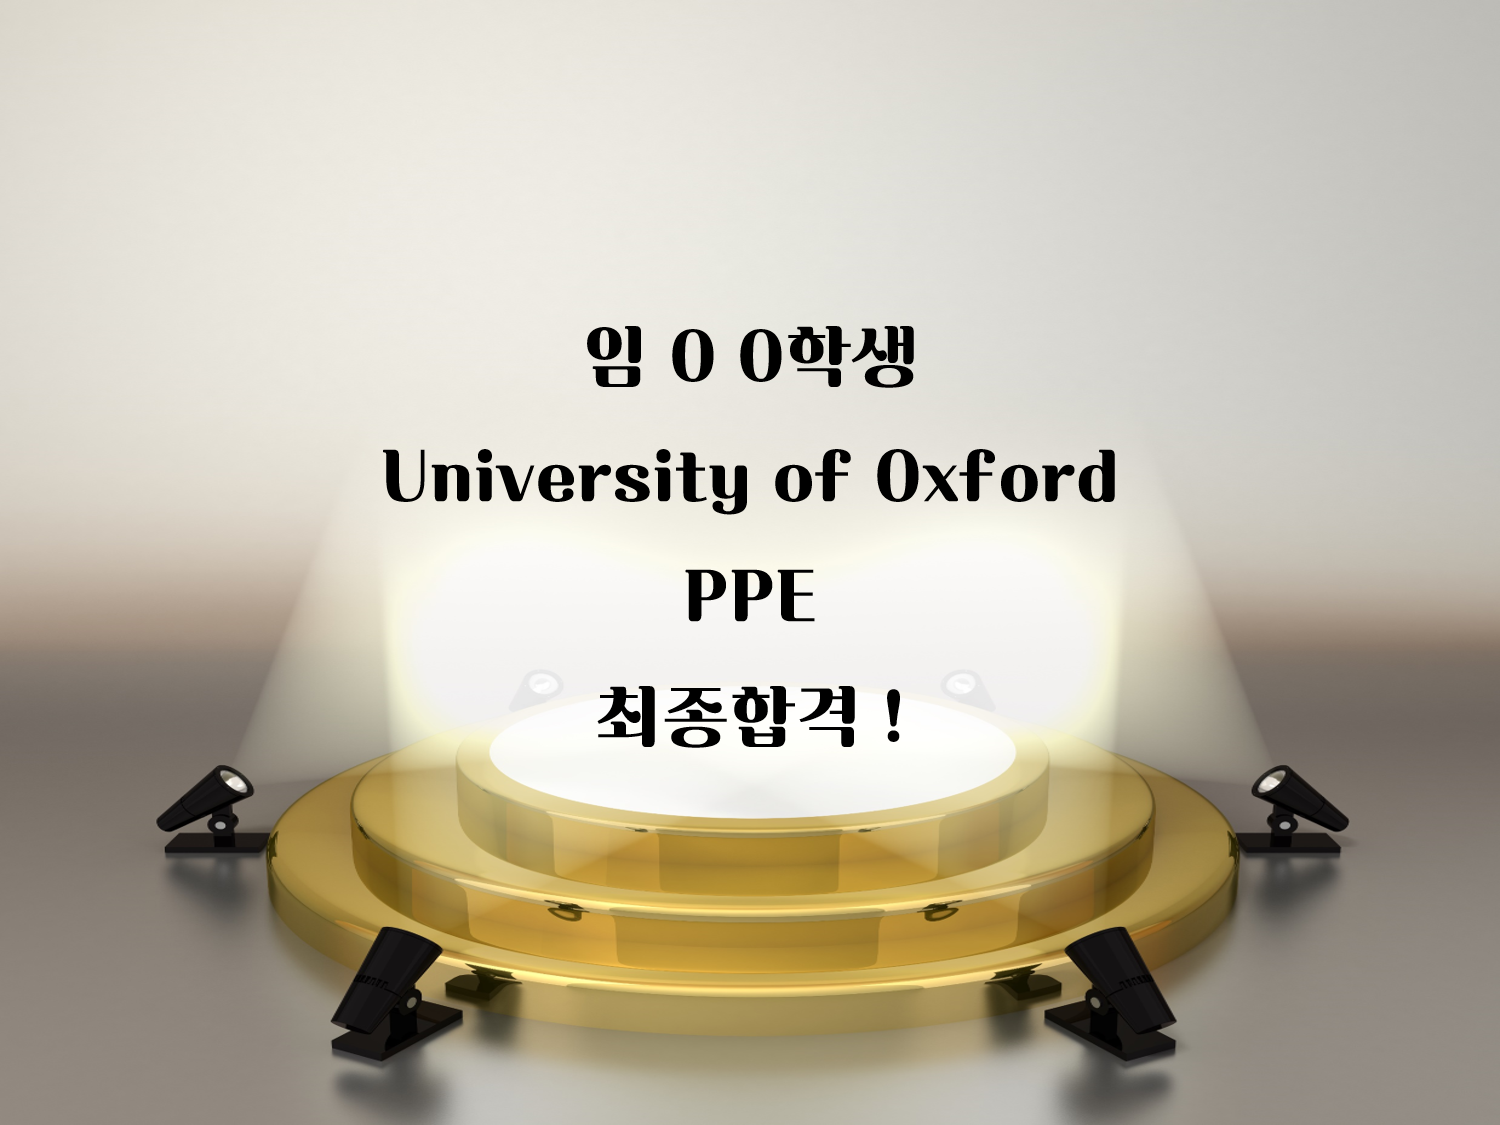 University of Oxford: PPE